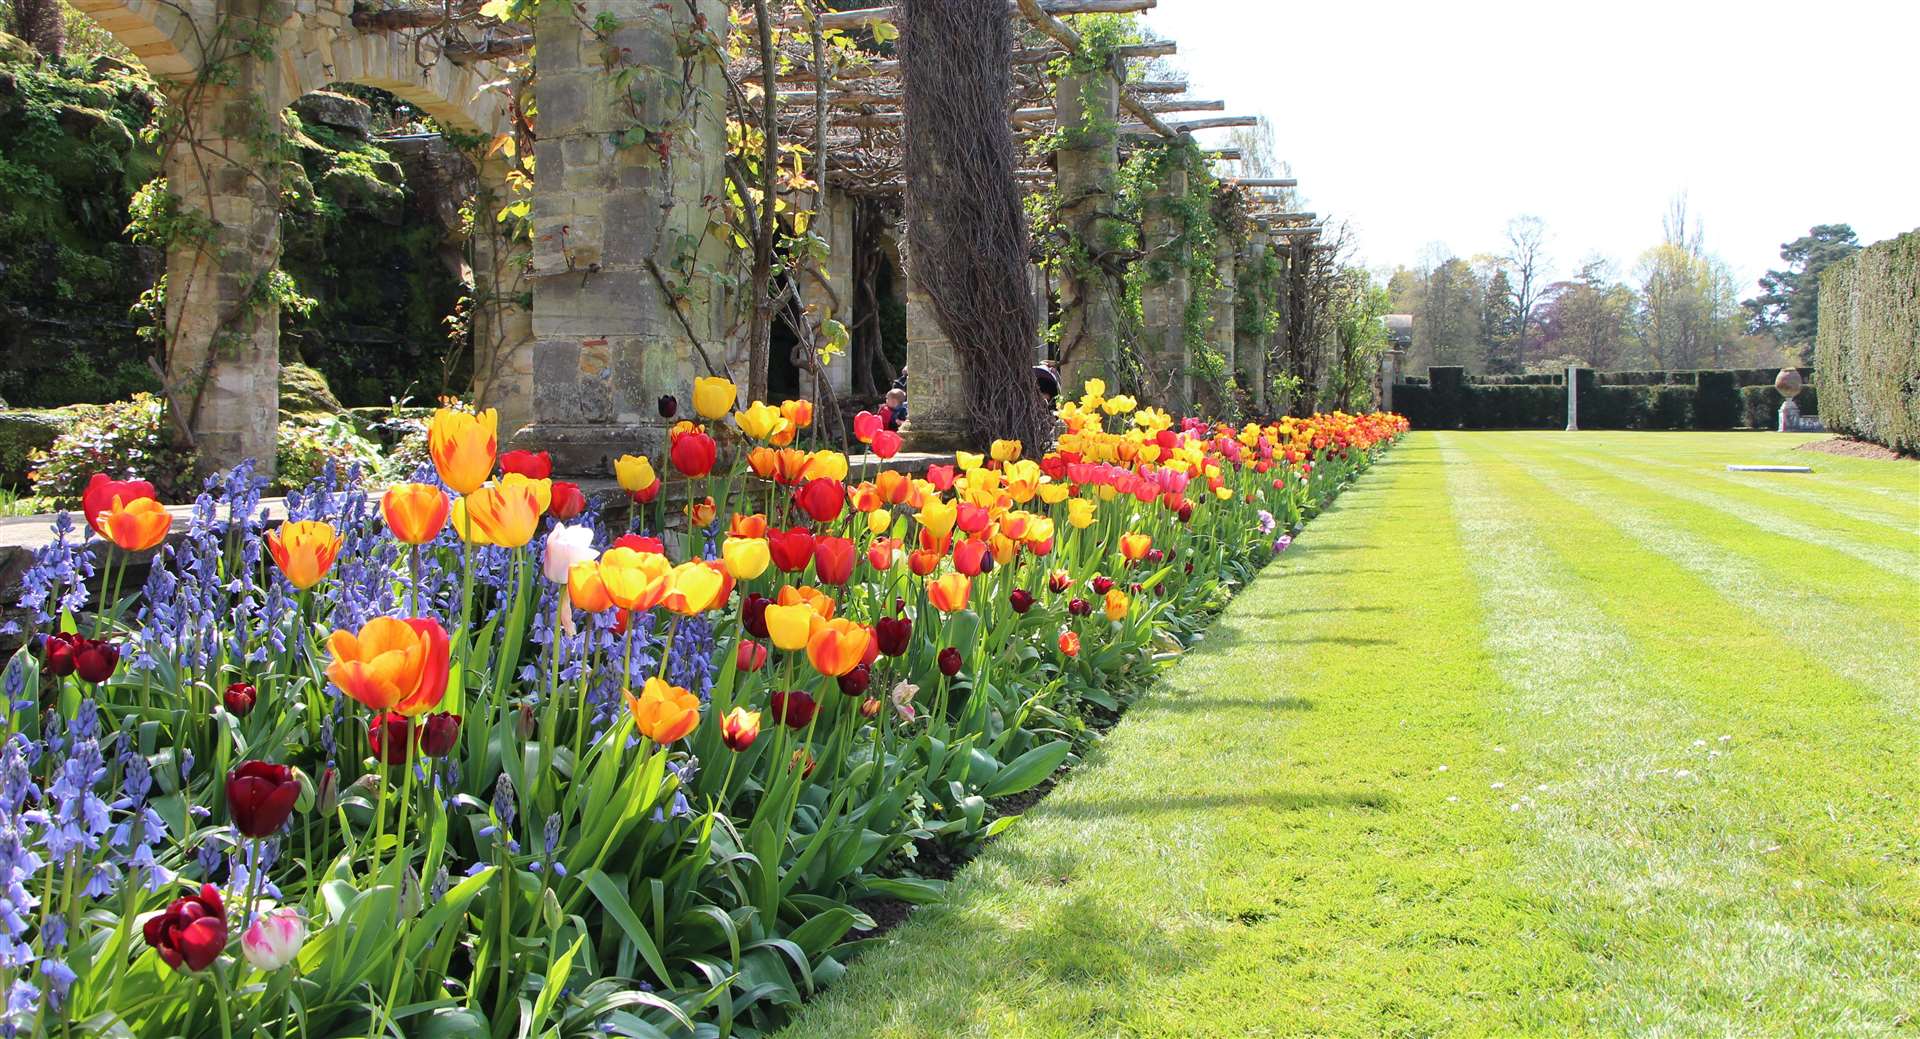 The Tulip Festival will take place at Hever Castle